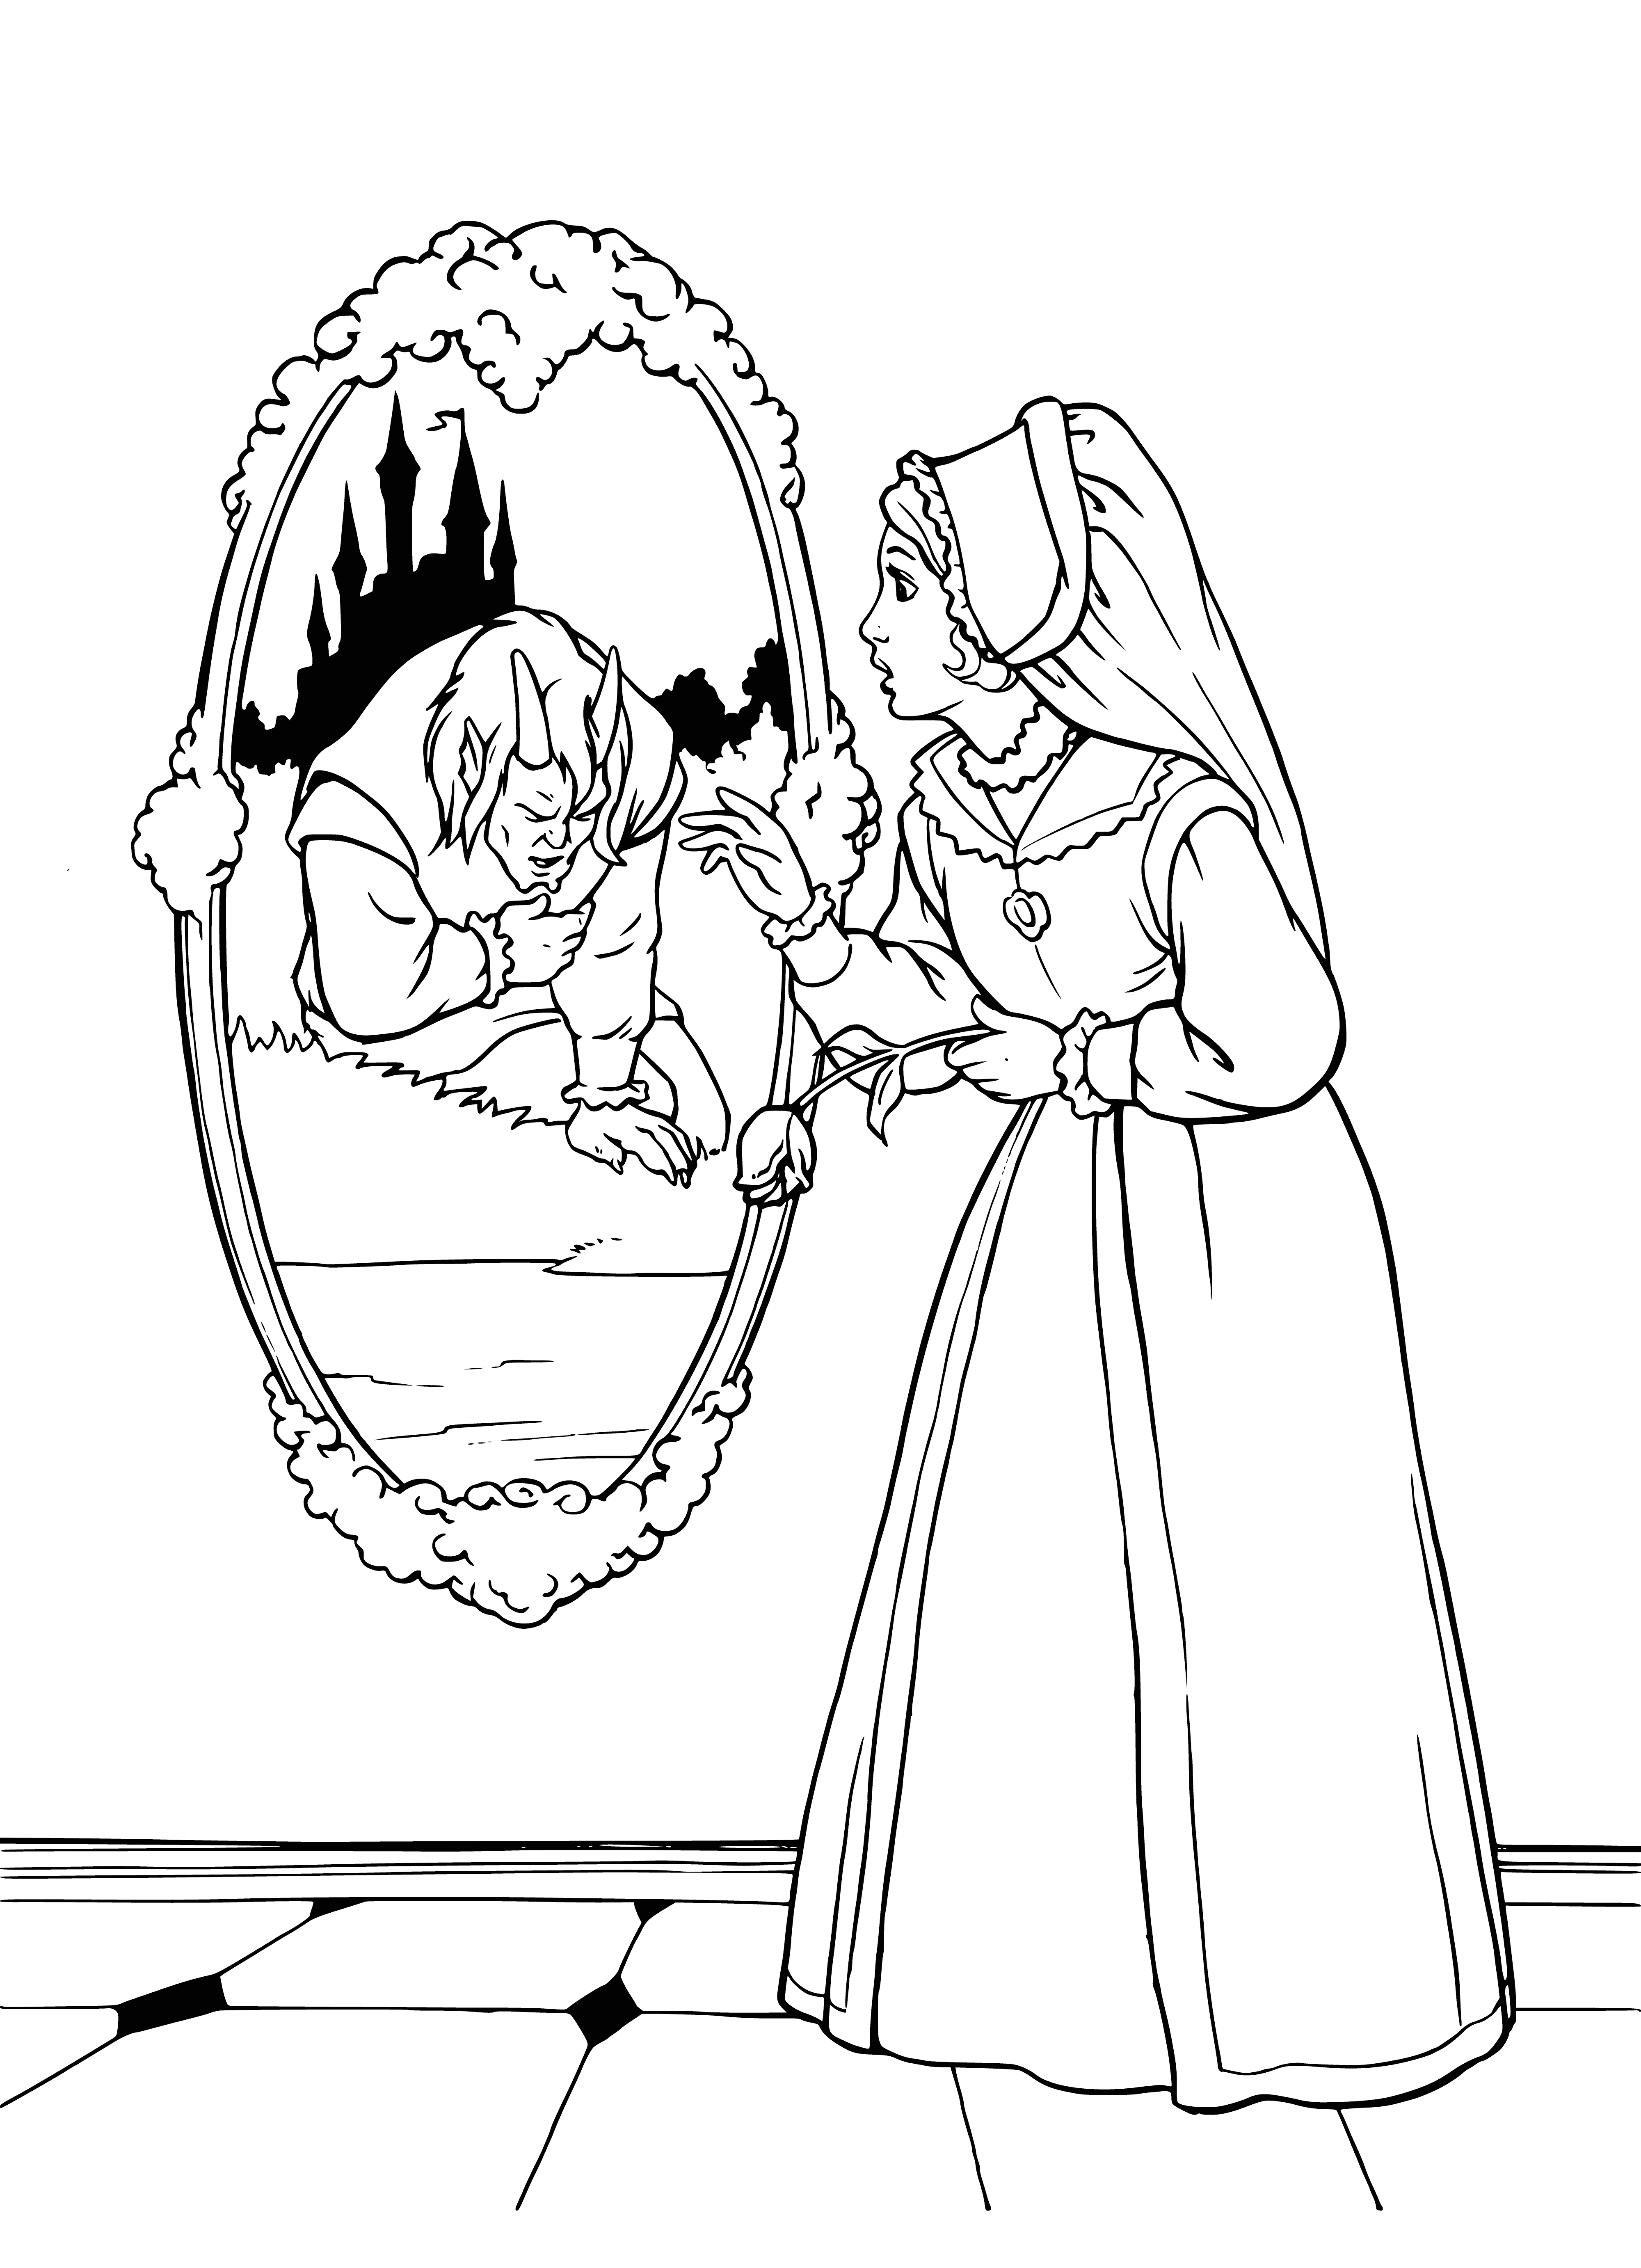 coloring page: A monstrous creature with dangerous spikes, claws & teeth leers menacingly at the camera.